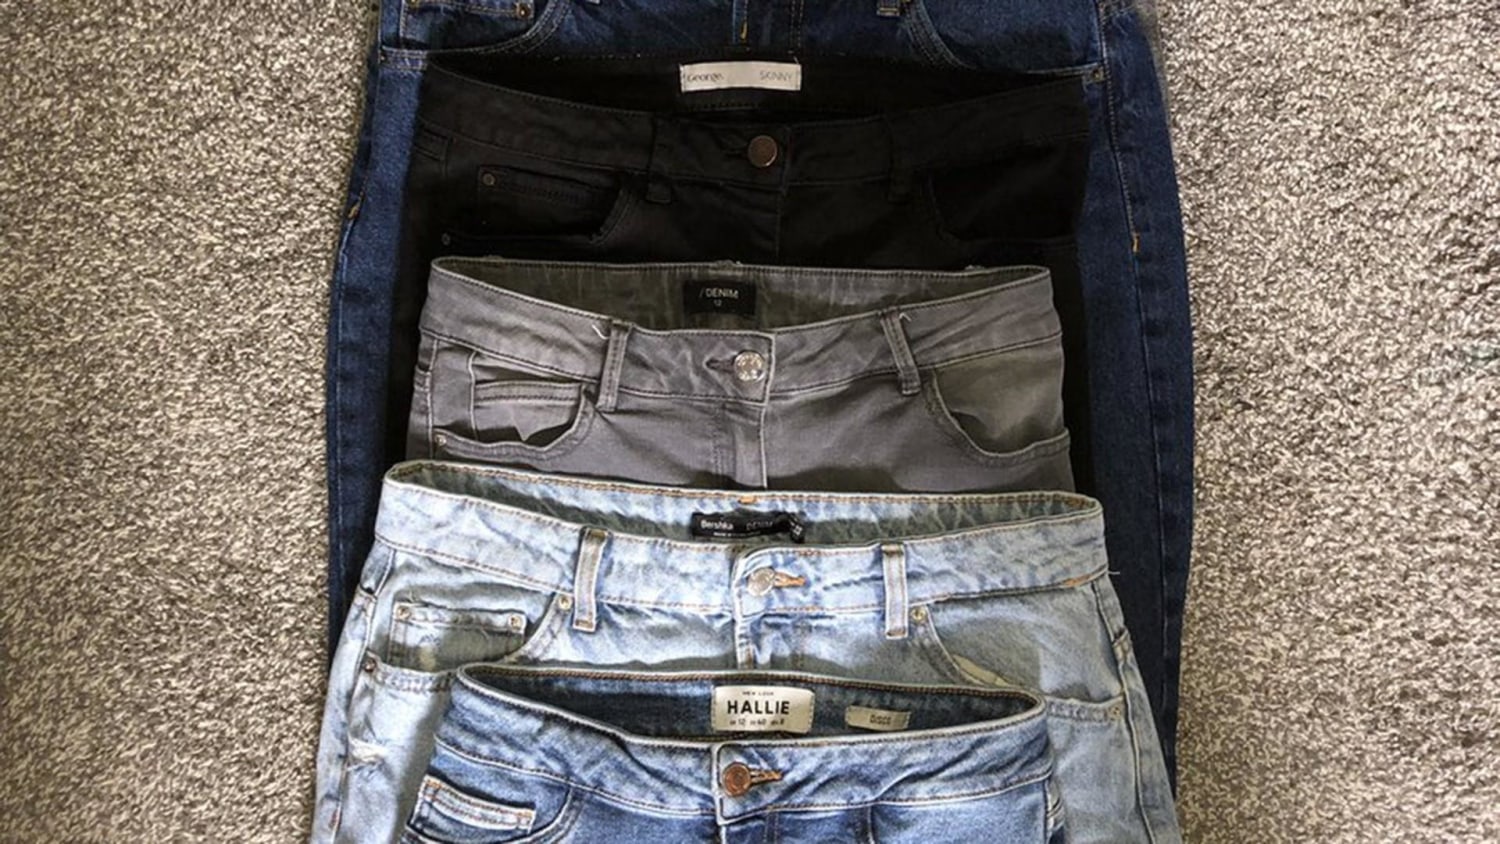 All Size 8 Jeans Have the Same Measurements, Right? Wrong! - ABC News